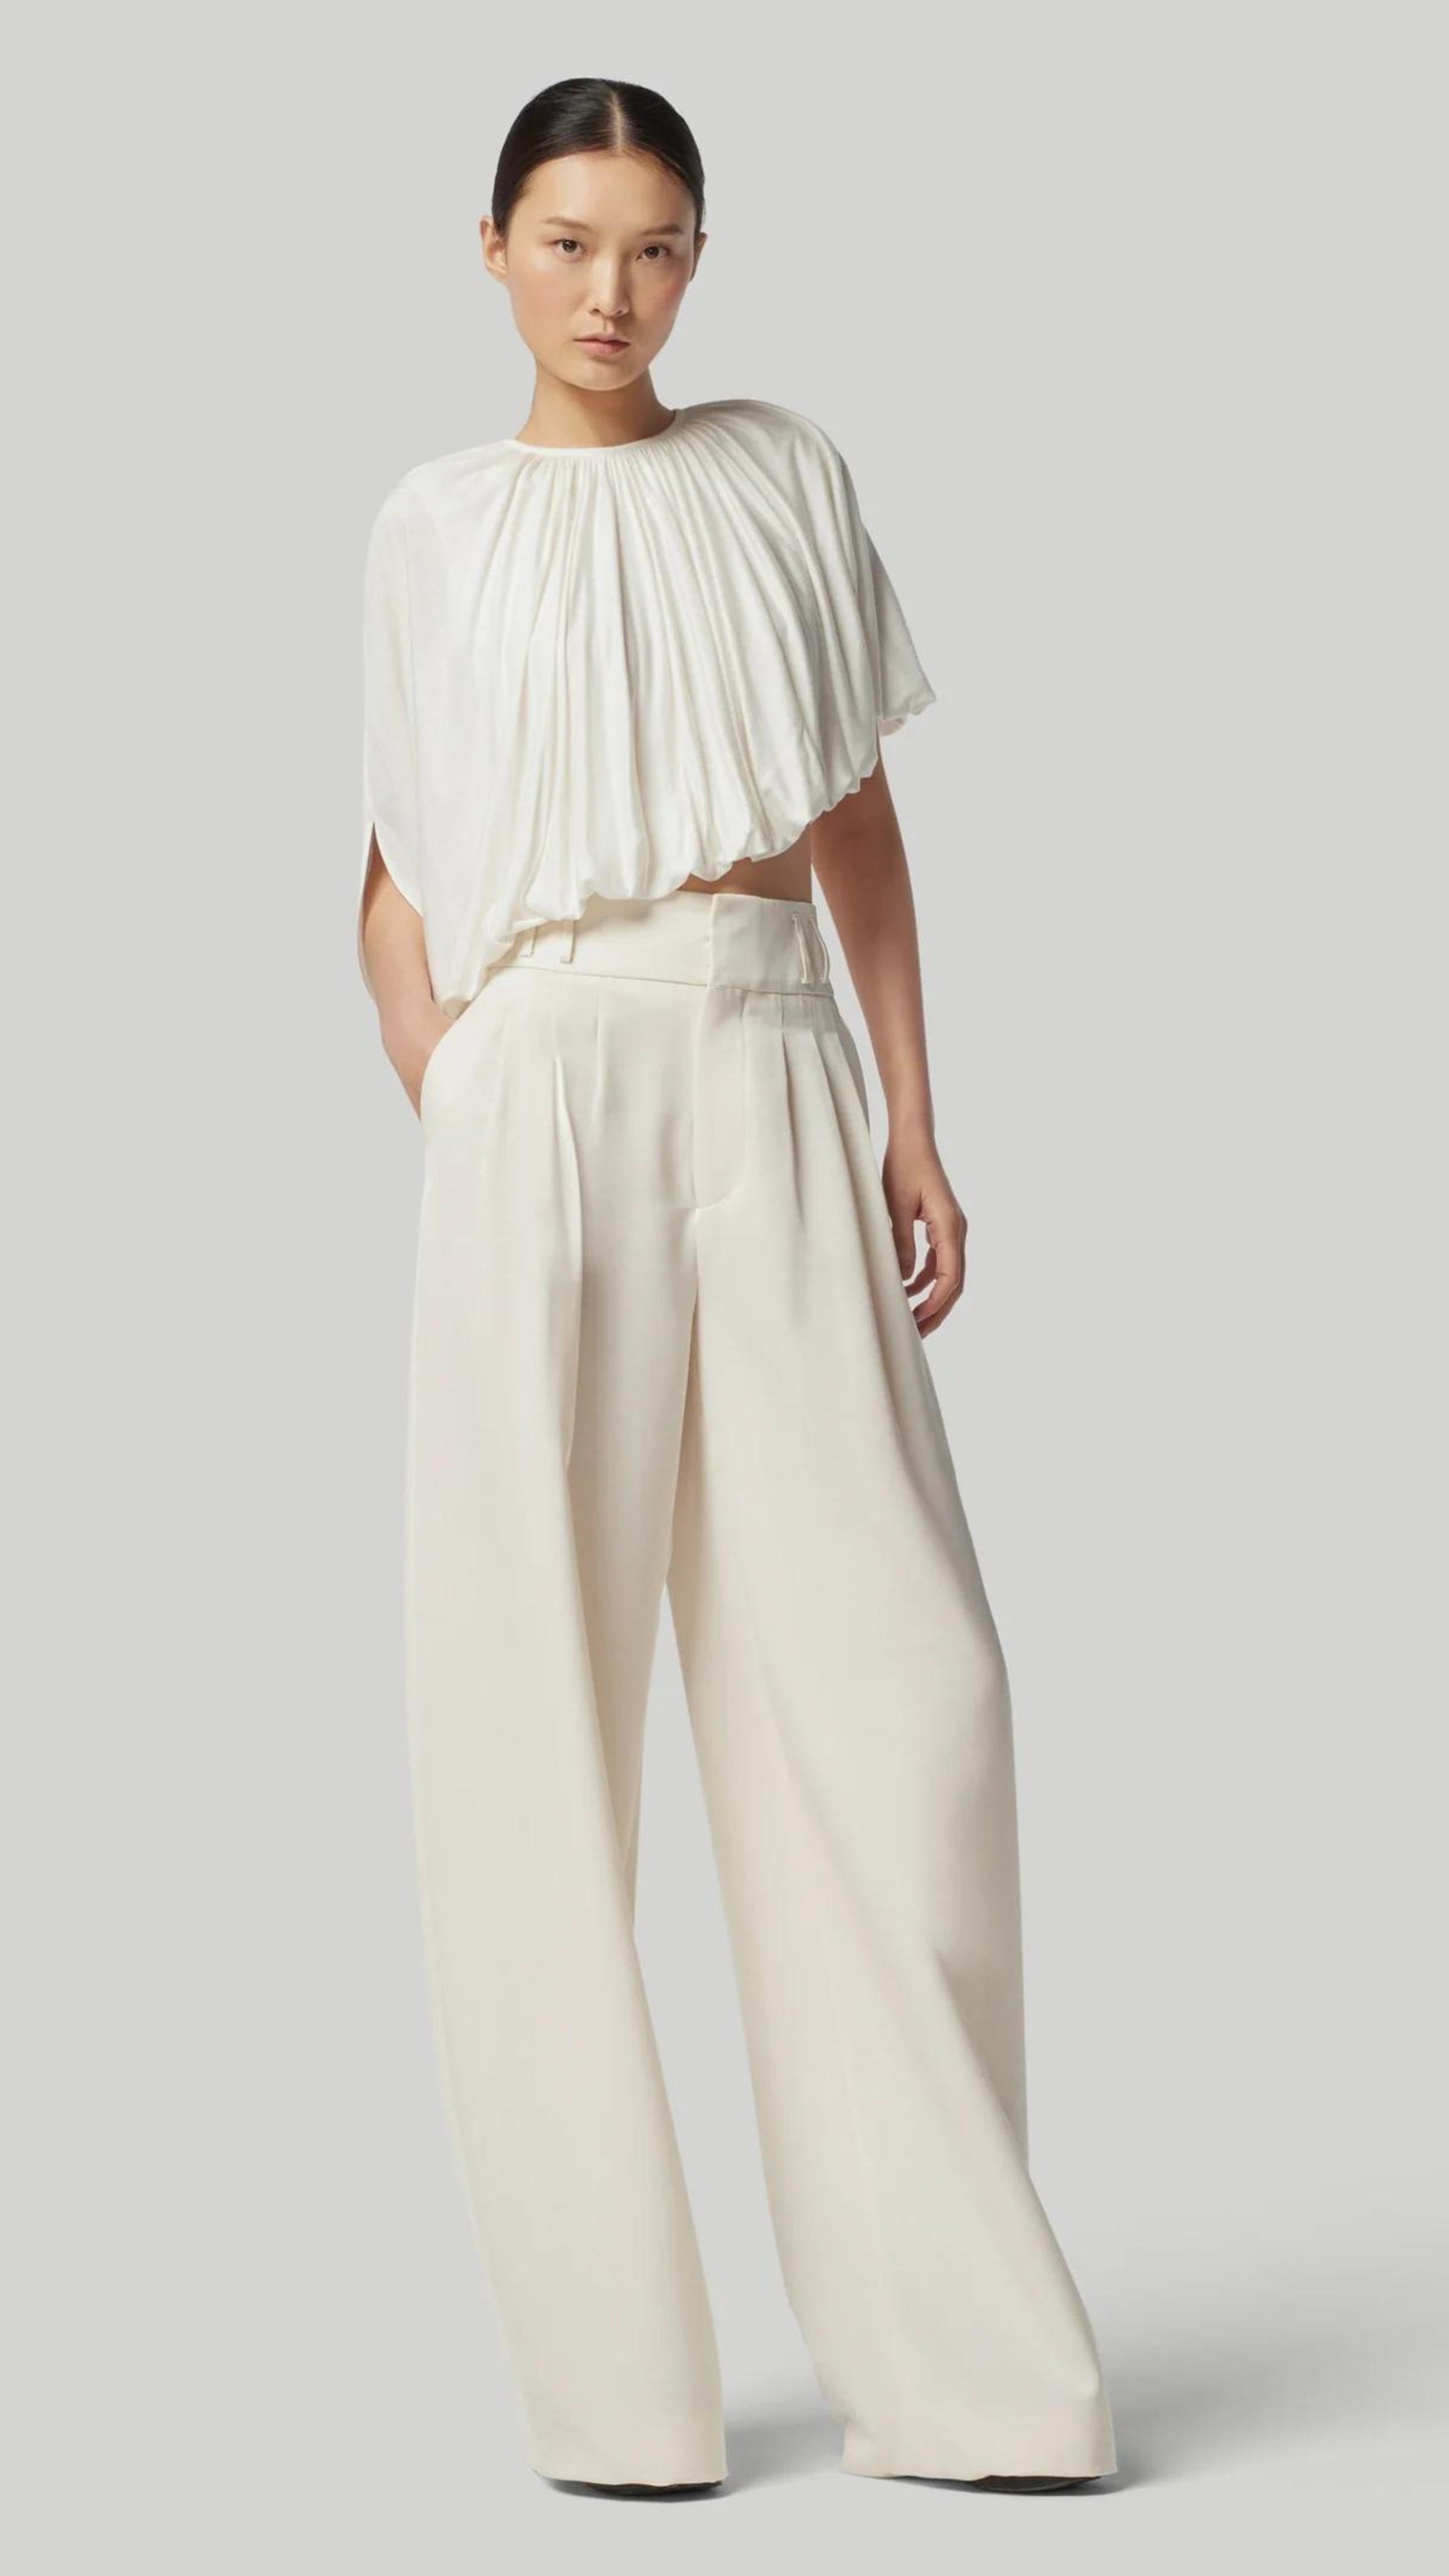 Altuzarra Naxos Top in Ivory. Draped jersey create a fluid look with an asymmetrical hemline. Shown on model facing to the front side.